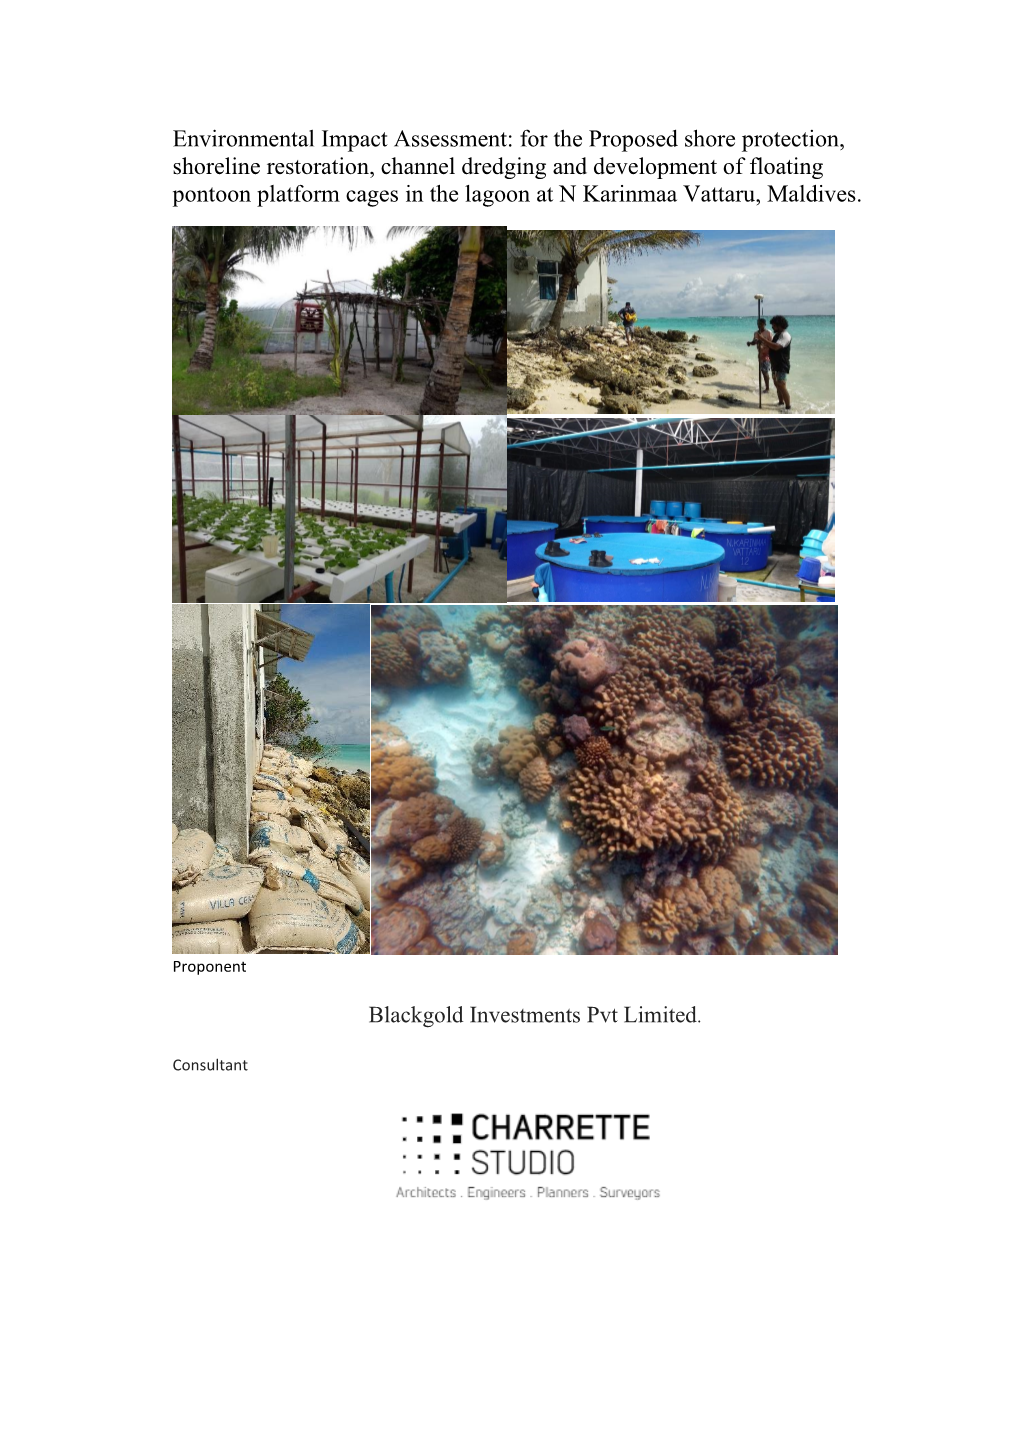 Environmental Impact Assessment: for the Proposed Shore Protection